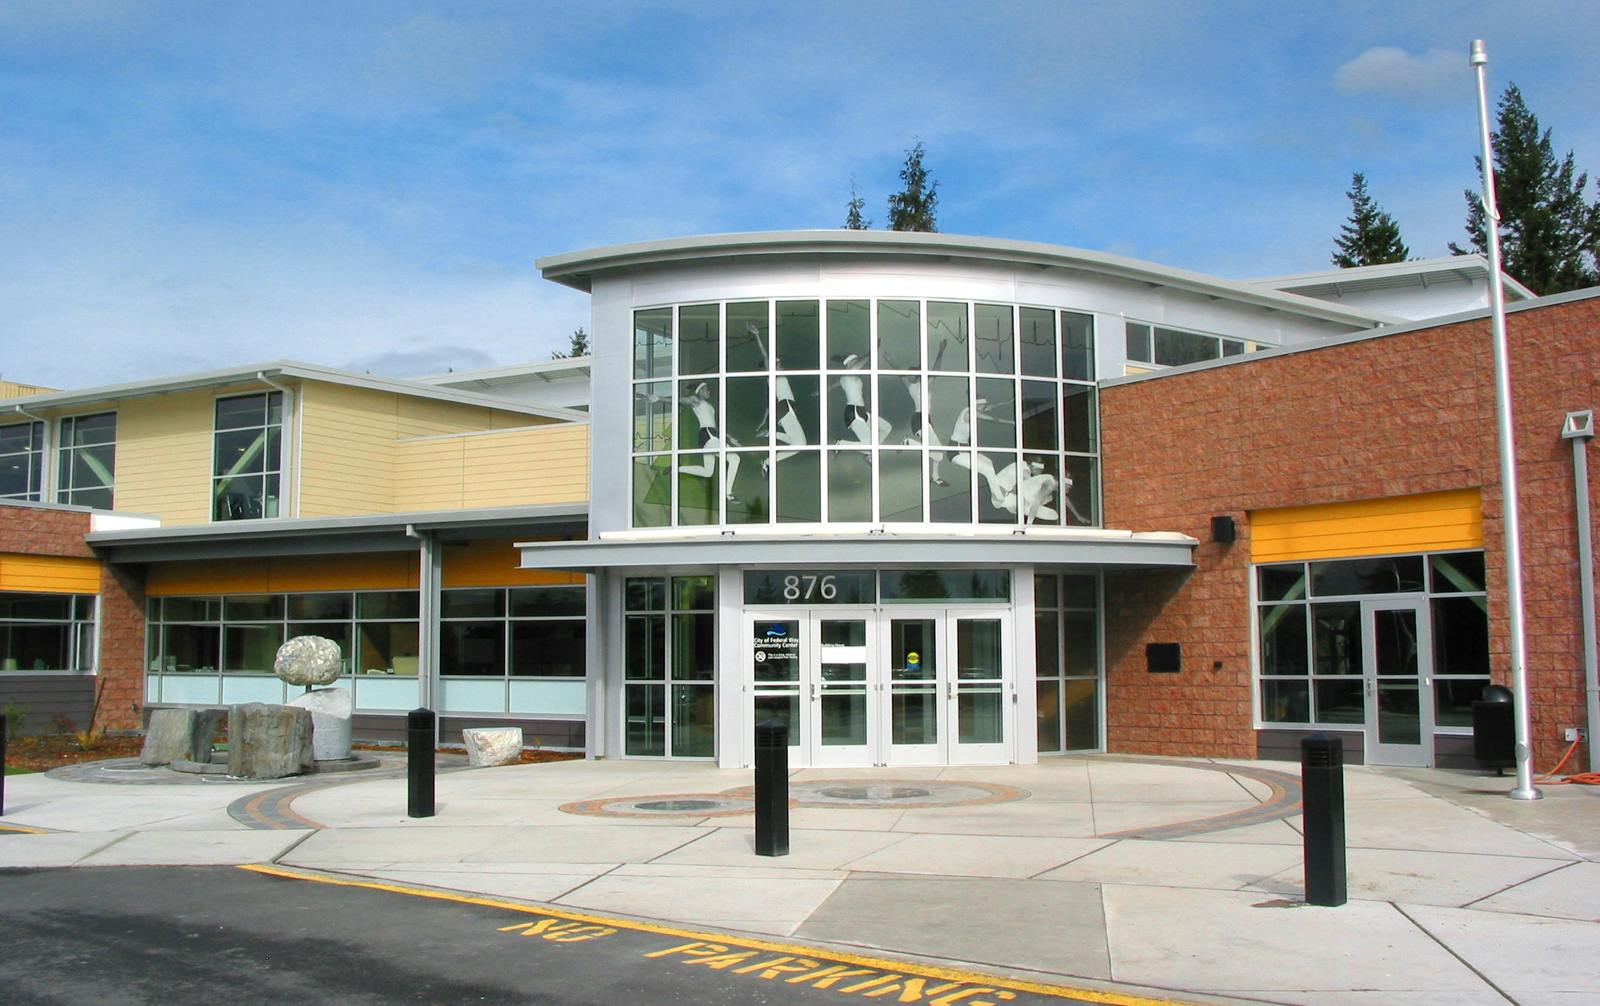 An image of the main entrance of Federal Way Community Center